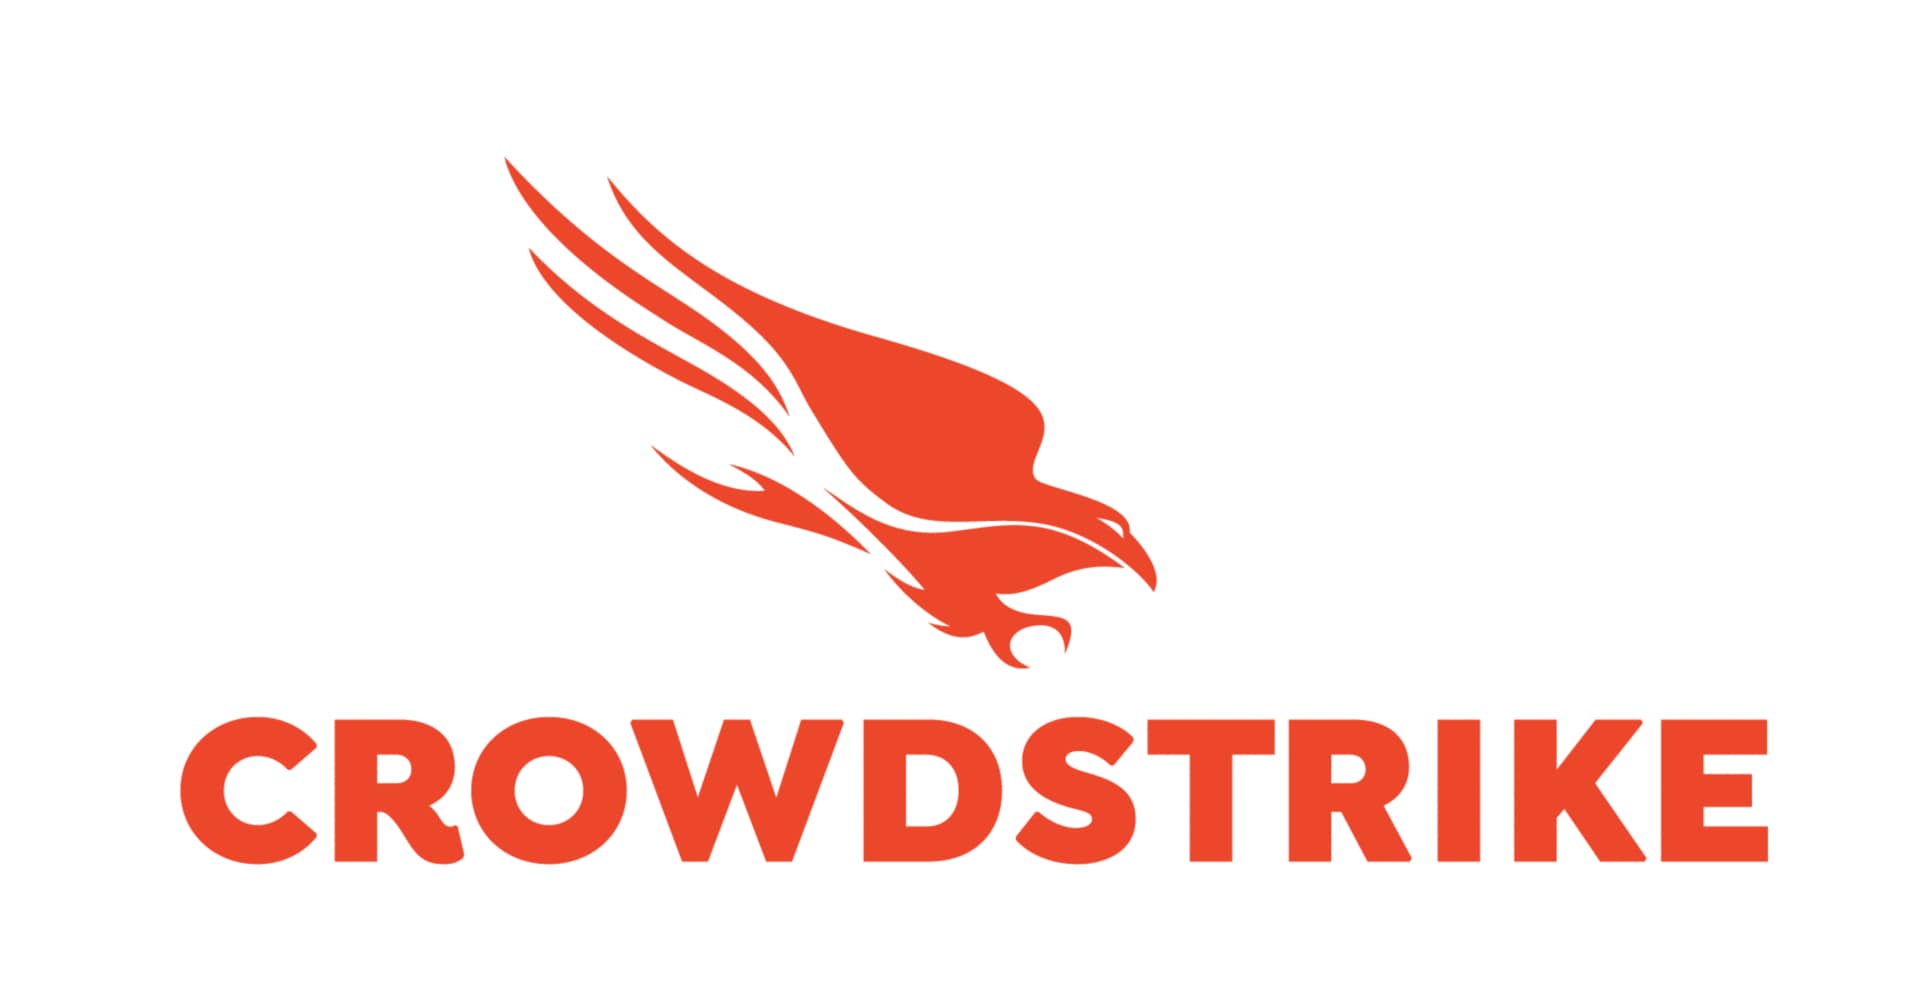 CrowdStrike 36-Month Falcon Overwatch Service (5,000-9,999 Licenses)